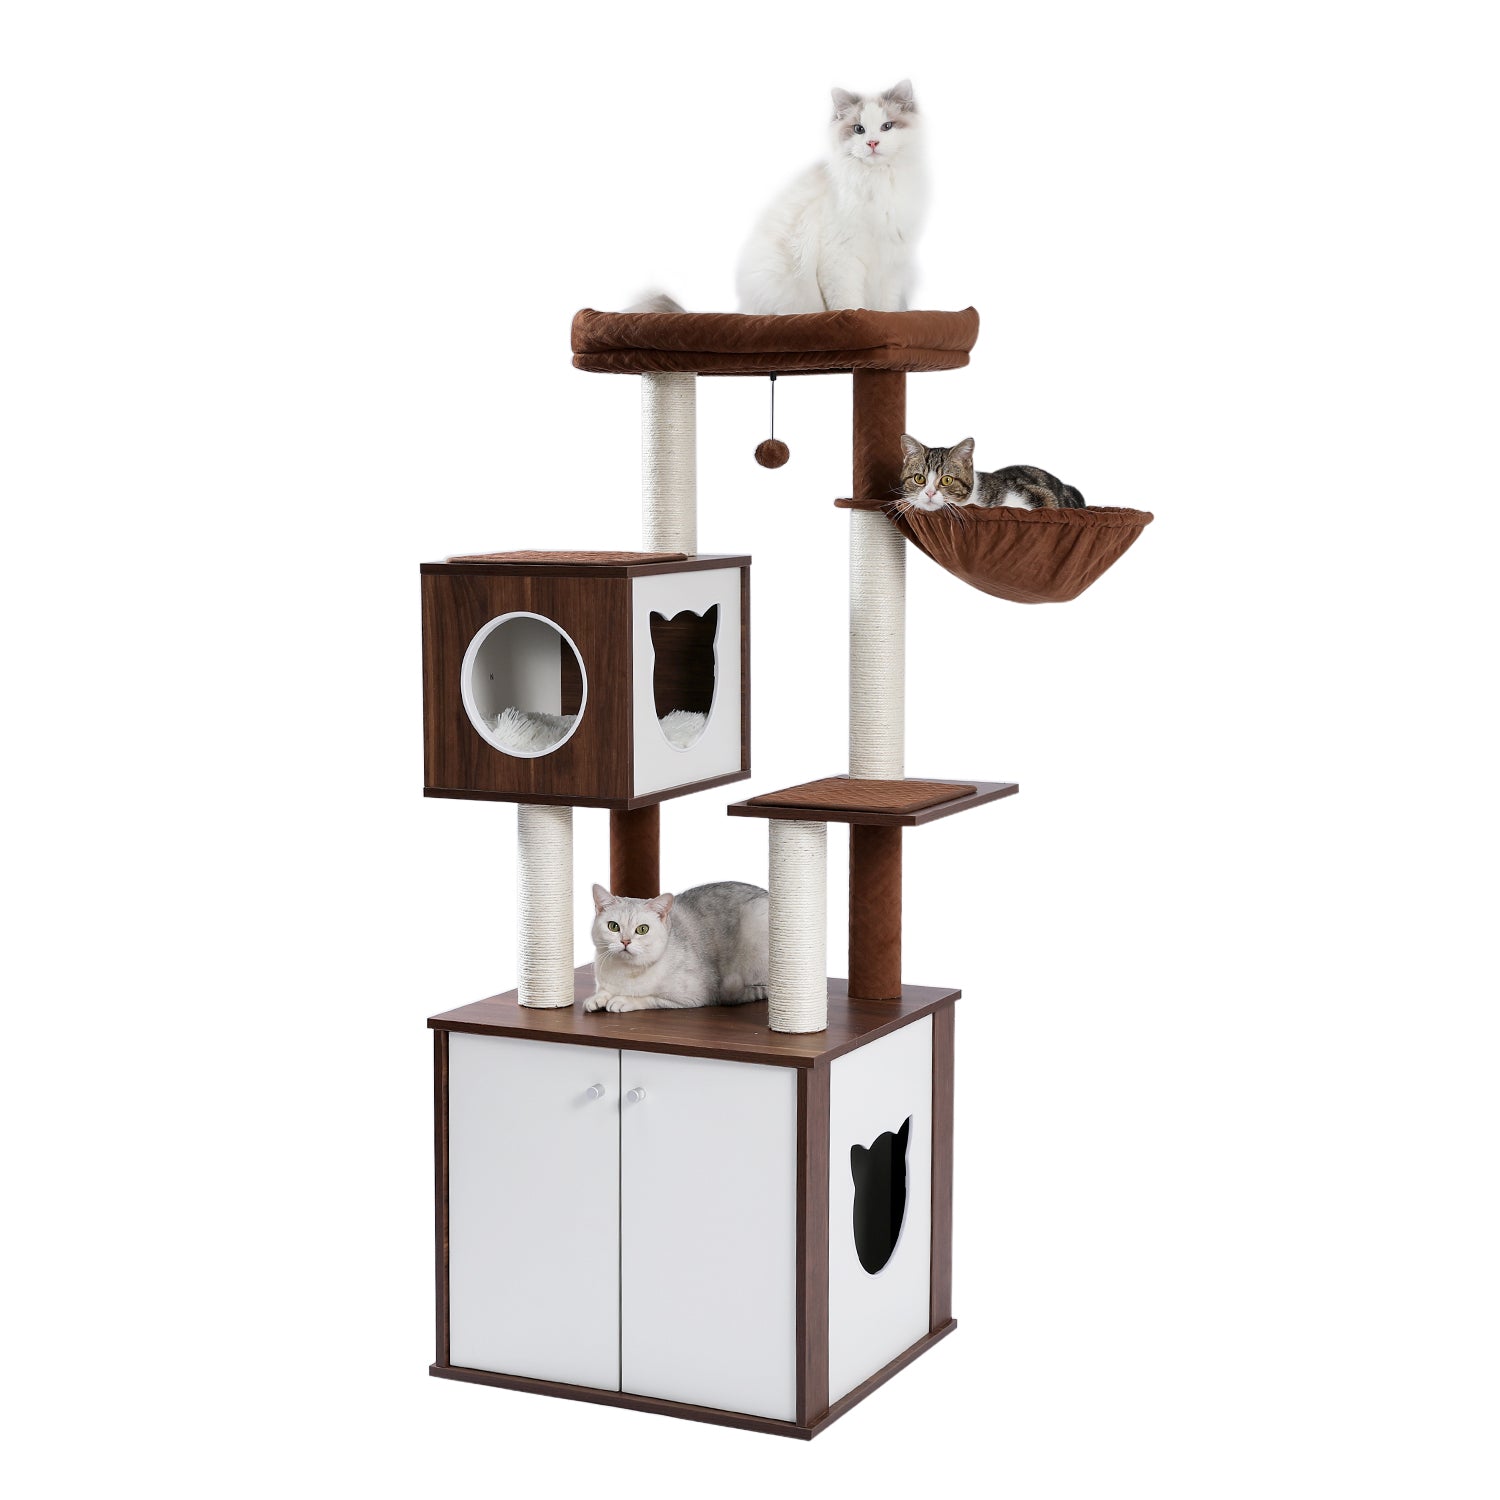 Brown All-in-One Cat Tree Tower with Multi-Functional Washroom Litter Box, Condo, Perch, Hammock, and Scratching Post for Cats - TOYSHIP